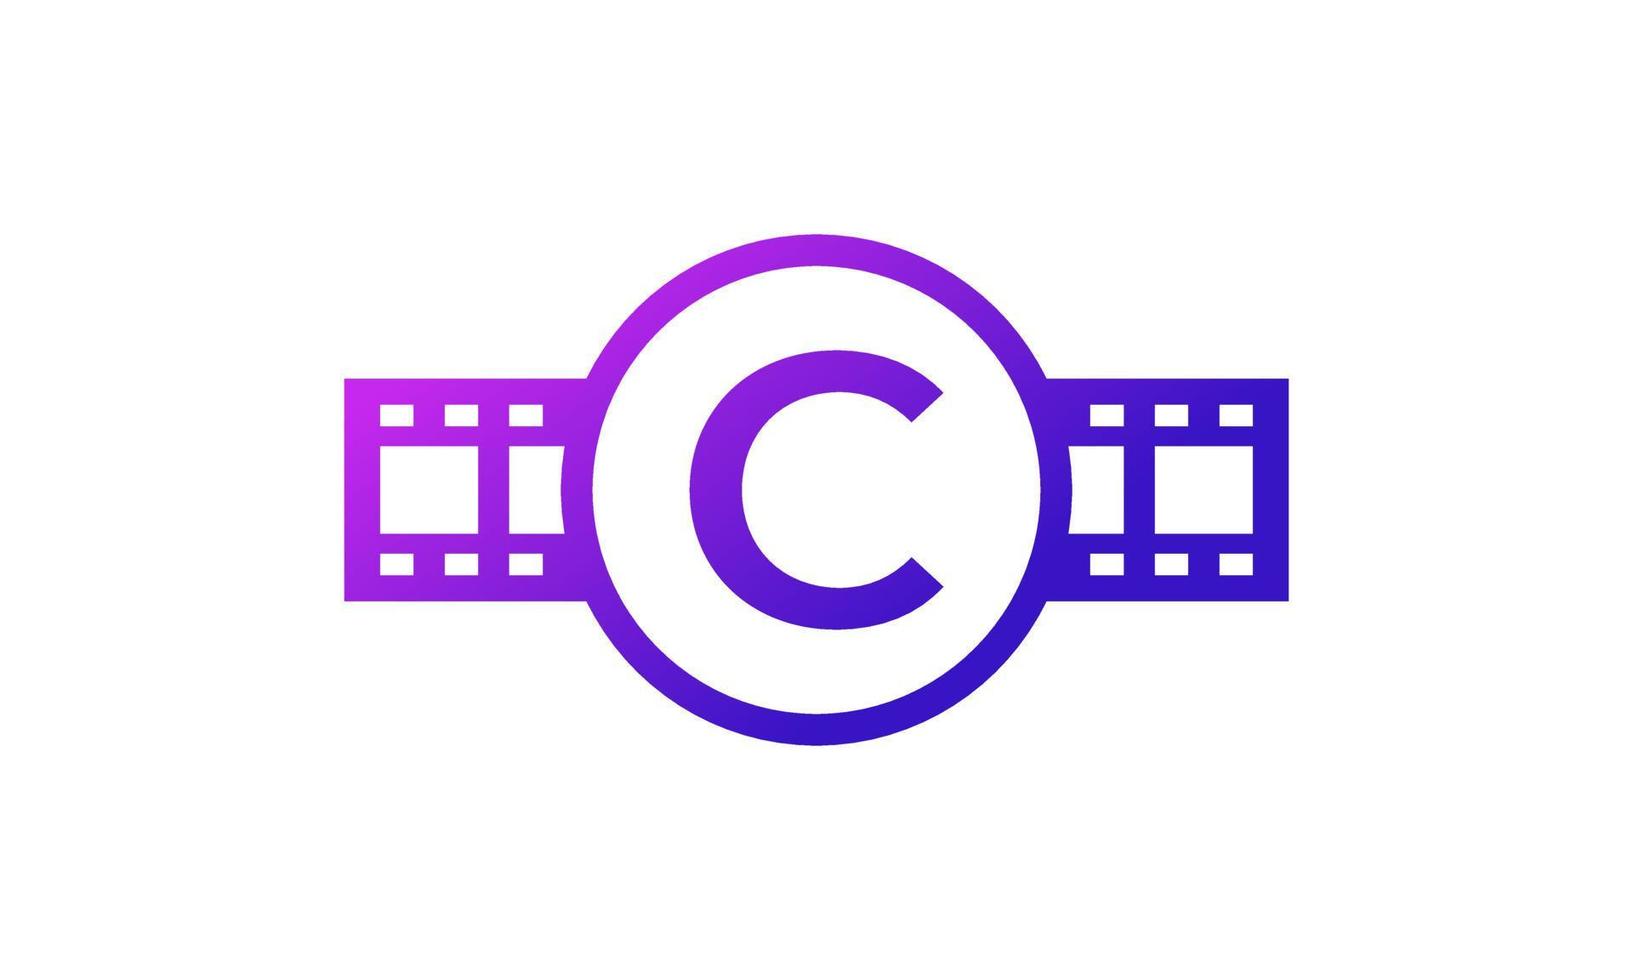 Initial Letter C Circle with Reel Stripes Filmstrip for Film Movie Cinema Production Studio Logo Inspiration vector